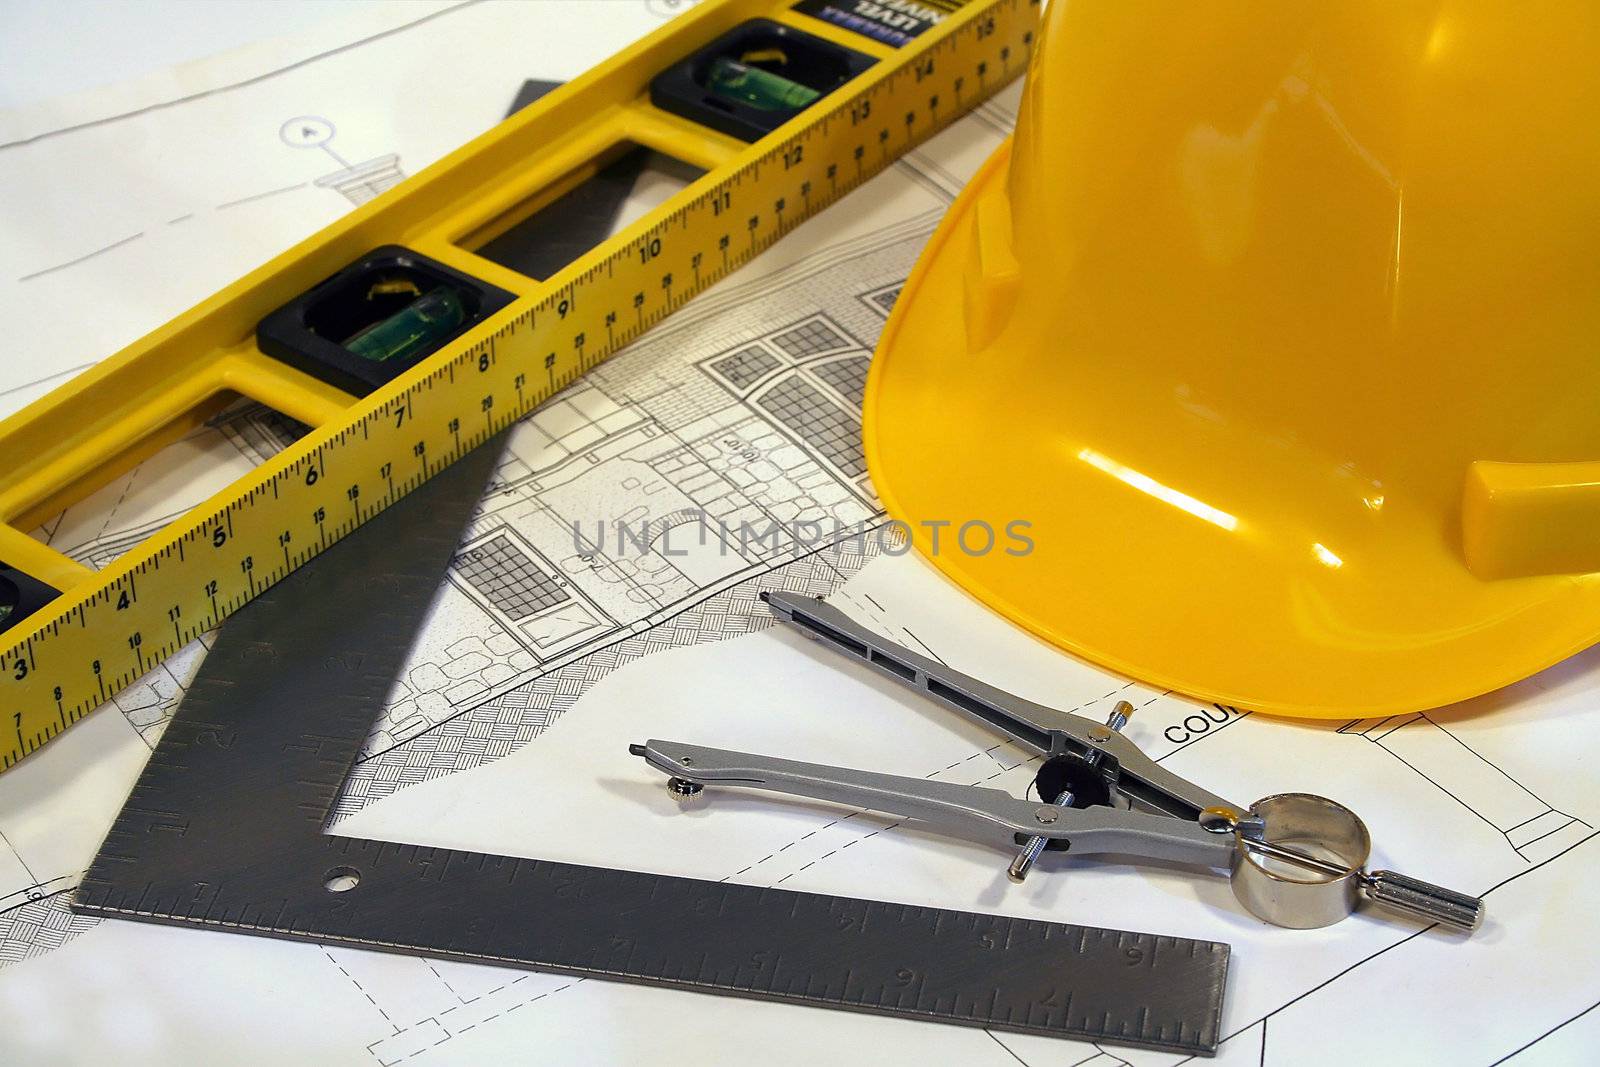 Architectural plans and tools for remodeling a home